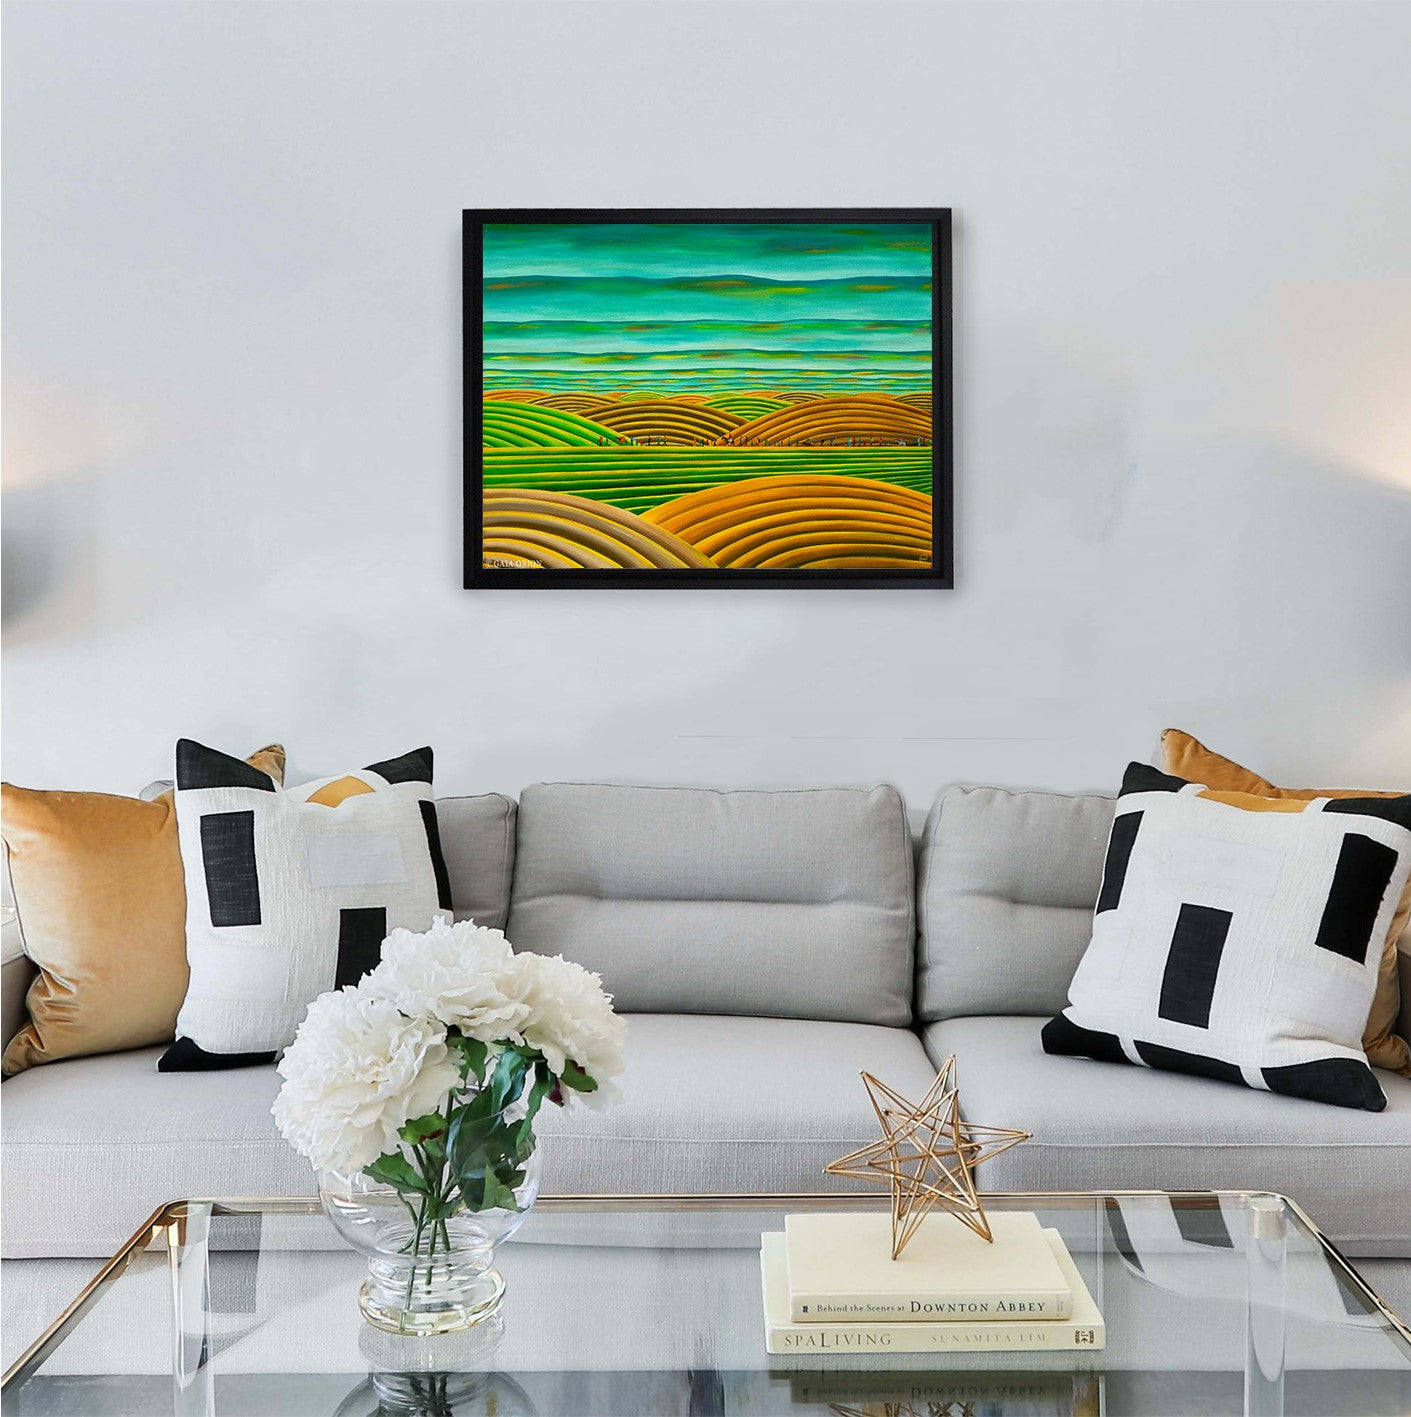 A framed print on canvas above a couch of a painting called Nomads yellow blue green sunset colours